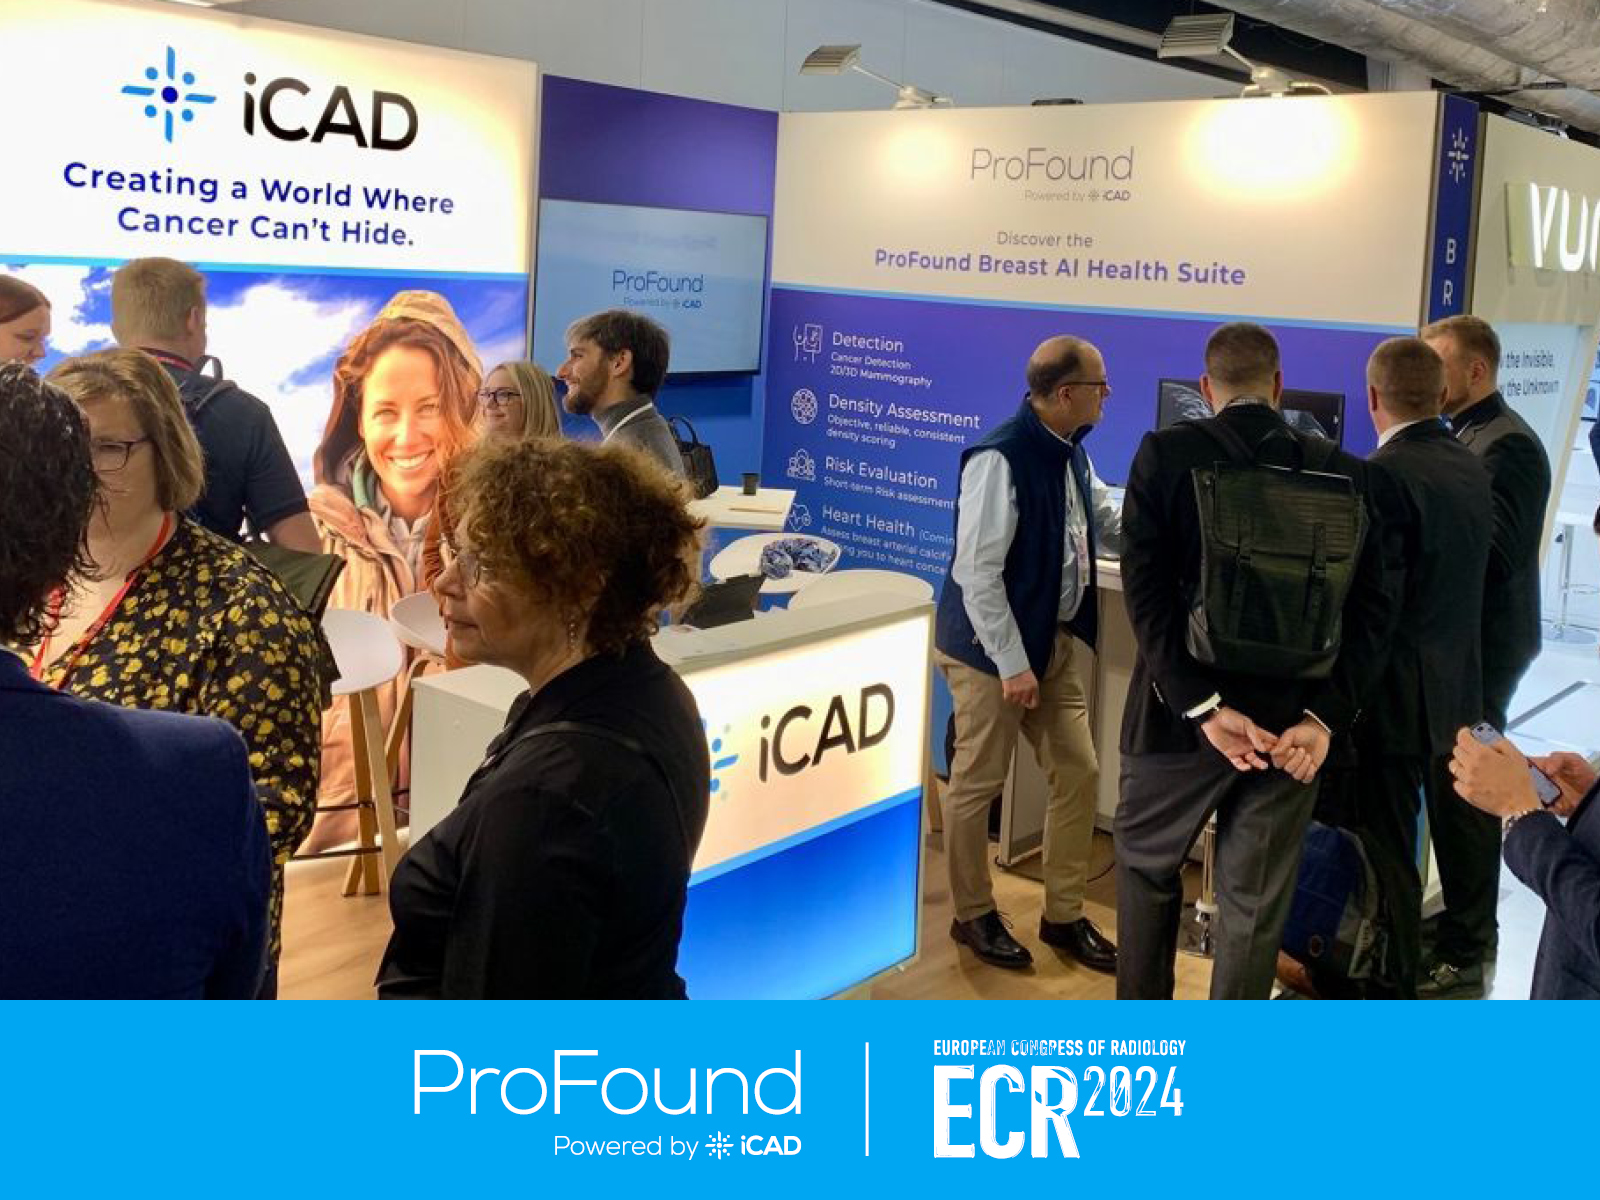 At ECR 2024, iCAD showed strong collaboration at European Congress: A Recap of Key Events